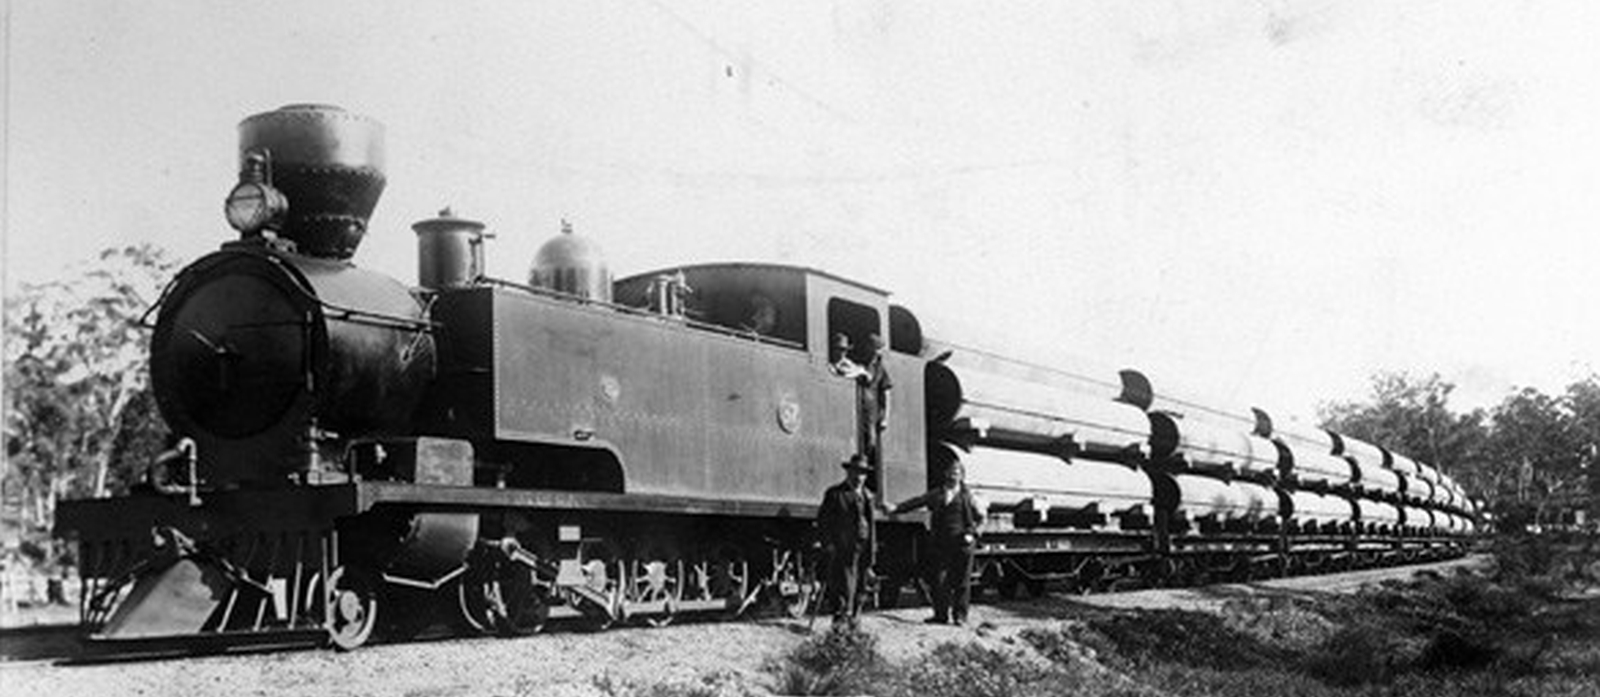 A class K member, probably K37, around 1902 in front of a train with water pipes